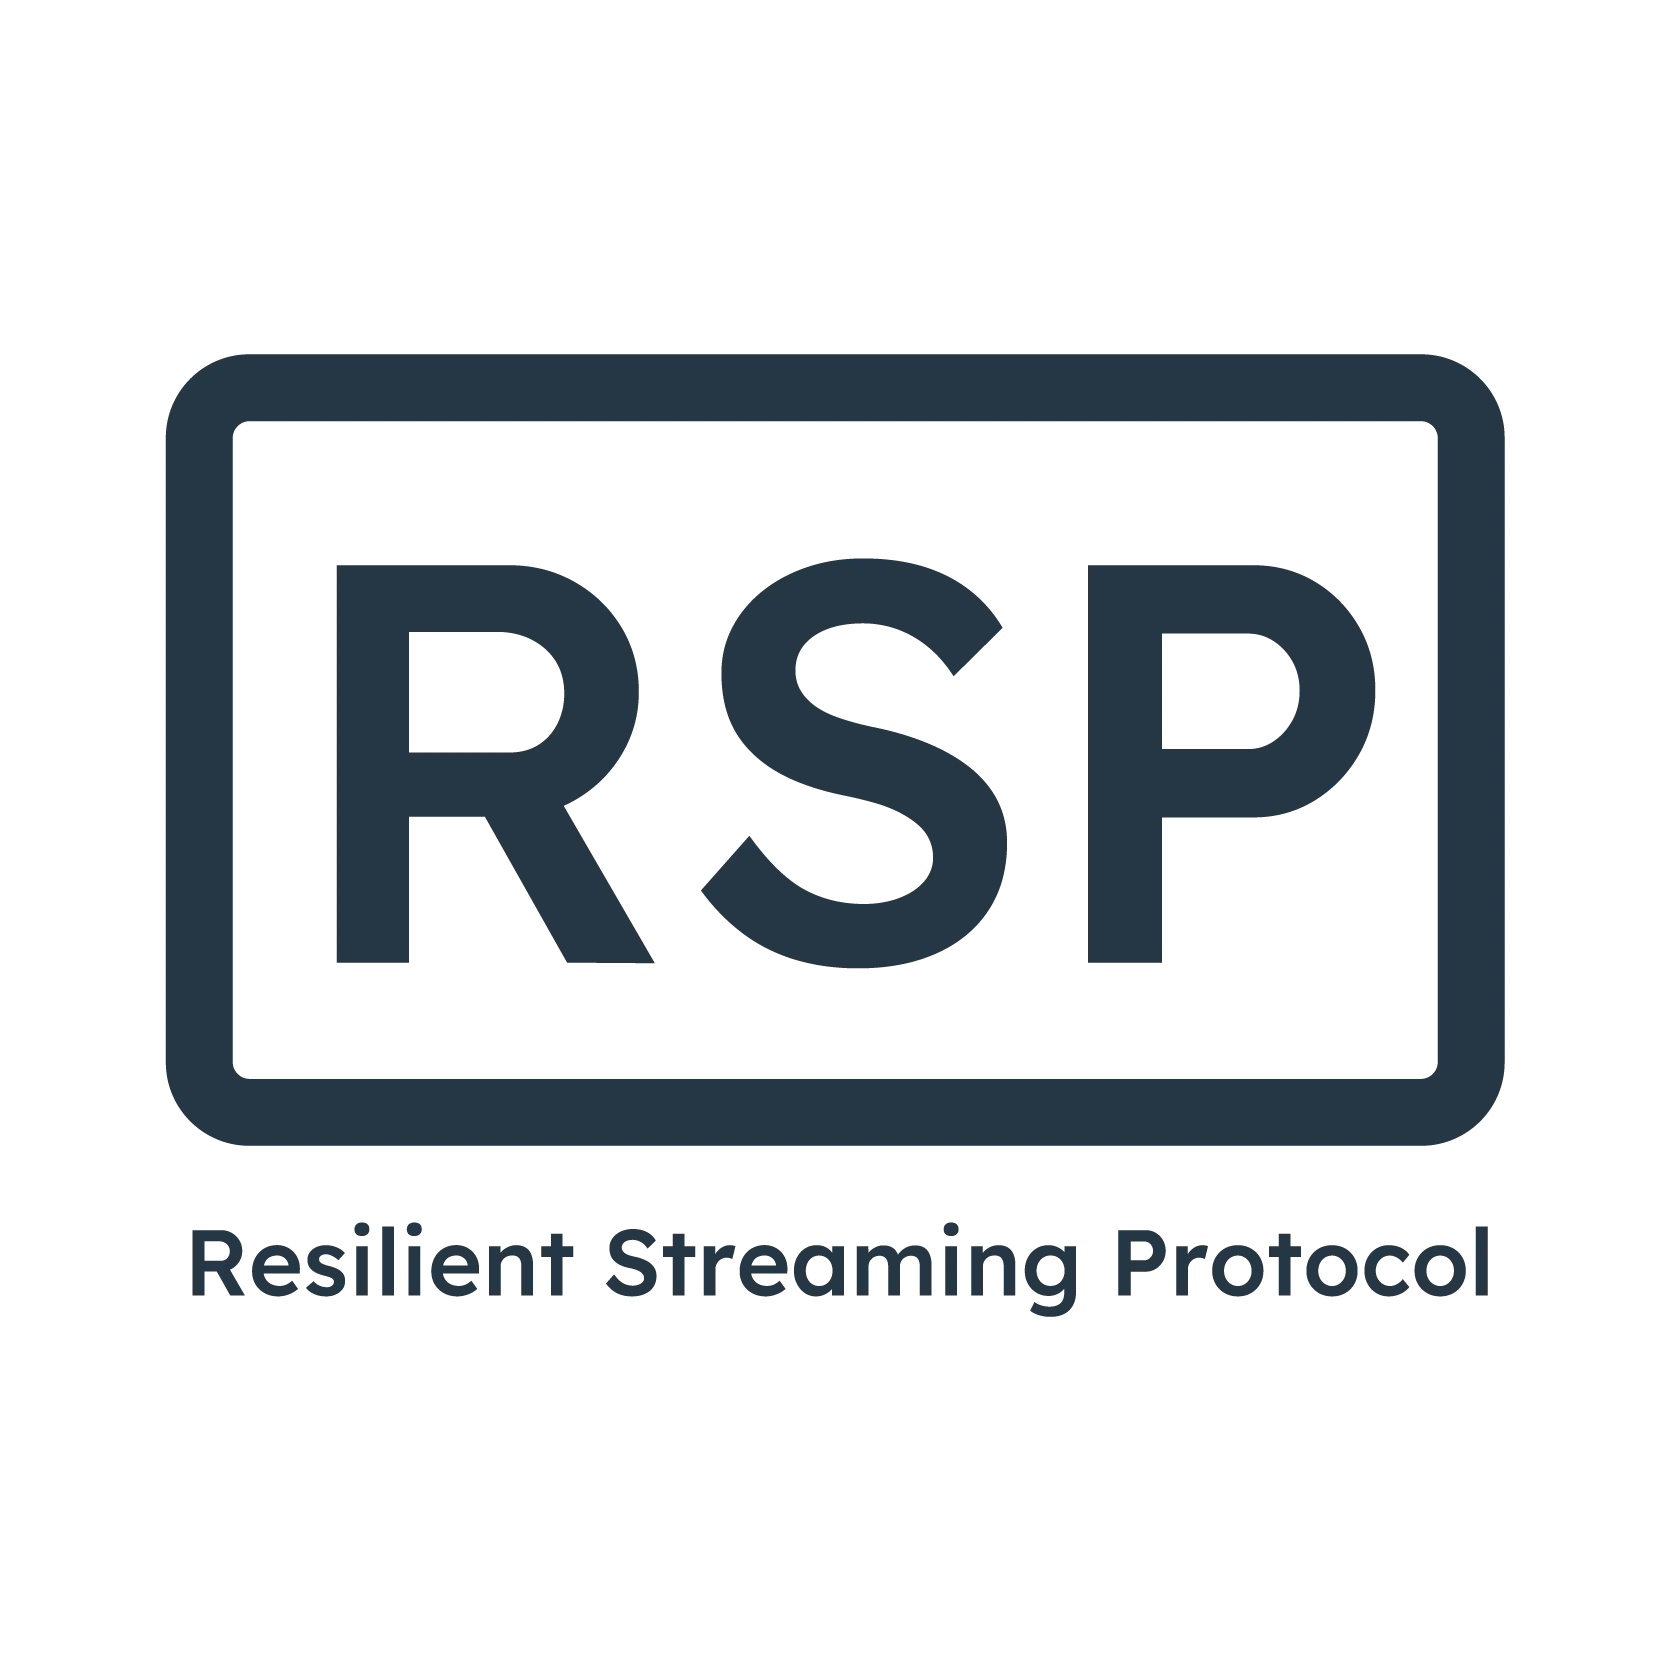 Resilient Streaming Protocol